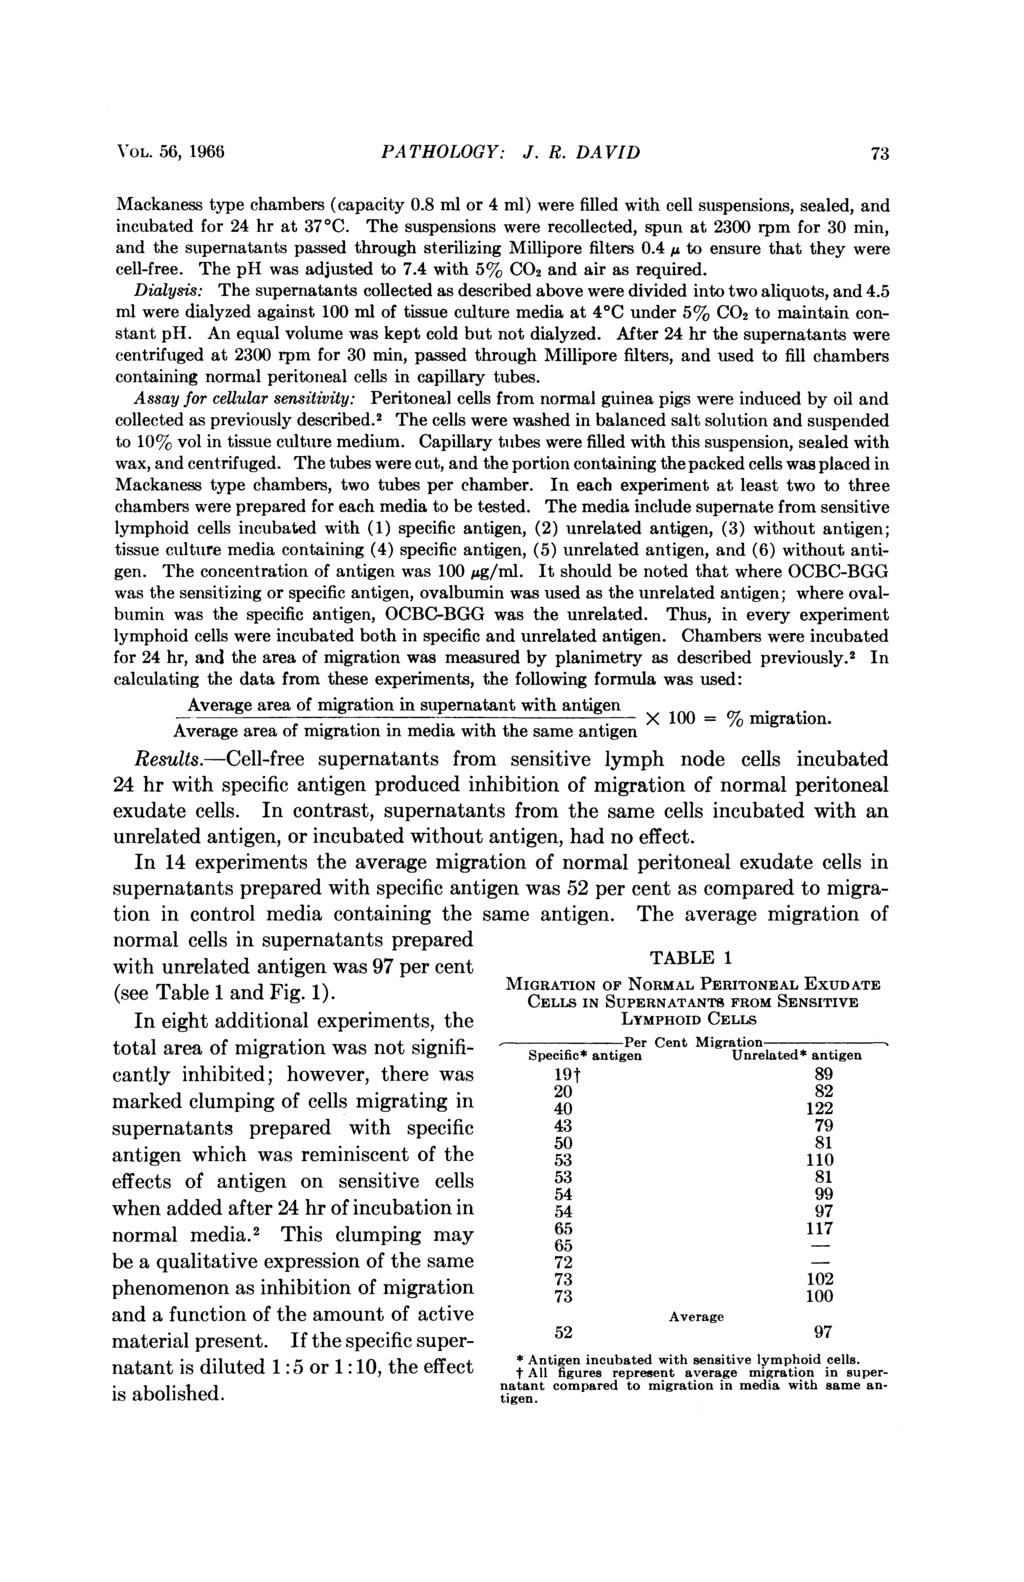 VOL. 56, 1966 PATHOLOGY: J. R. DAVID 73 Mackaness type chambers (capacity 0.8 ml or 4 ml) were filled with cell suspensions, sealed, and incubated for 24 hr at 370C.